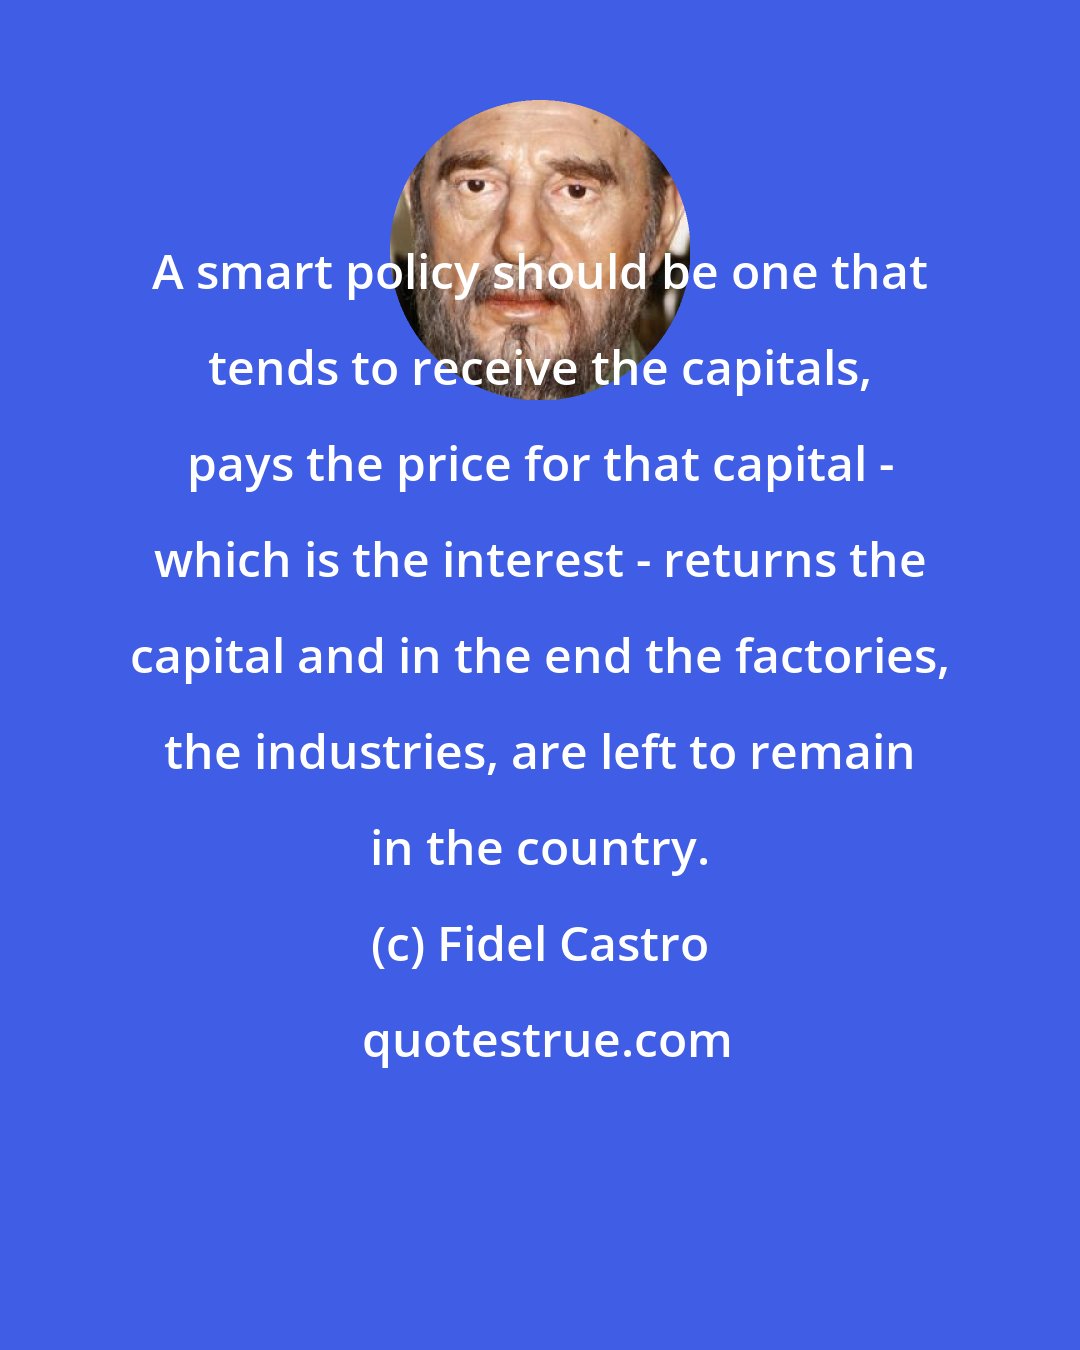 Fidel Castro: A smart policy should be one that tends to receive the capitals, pays the price for that capital - which is the interest - returns the capital and in the end the factories, the industries, are left to remain in the country.